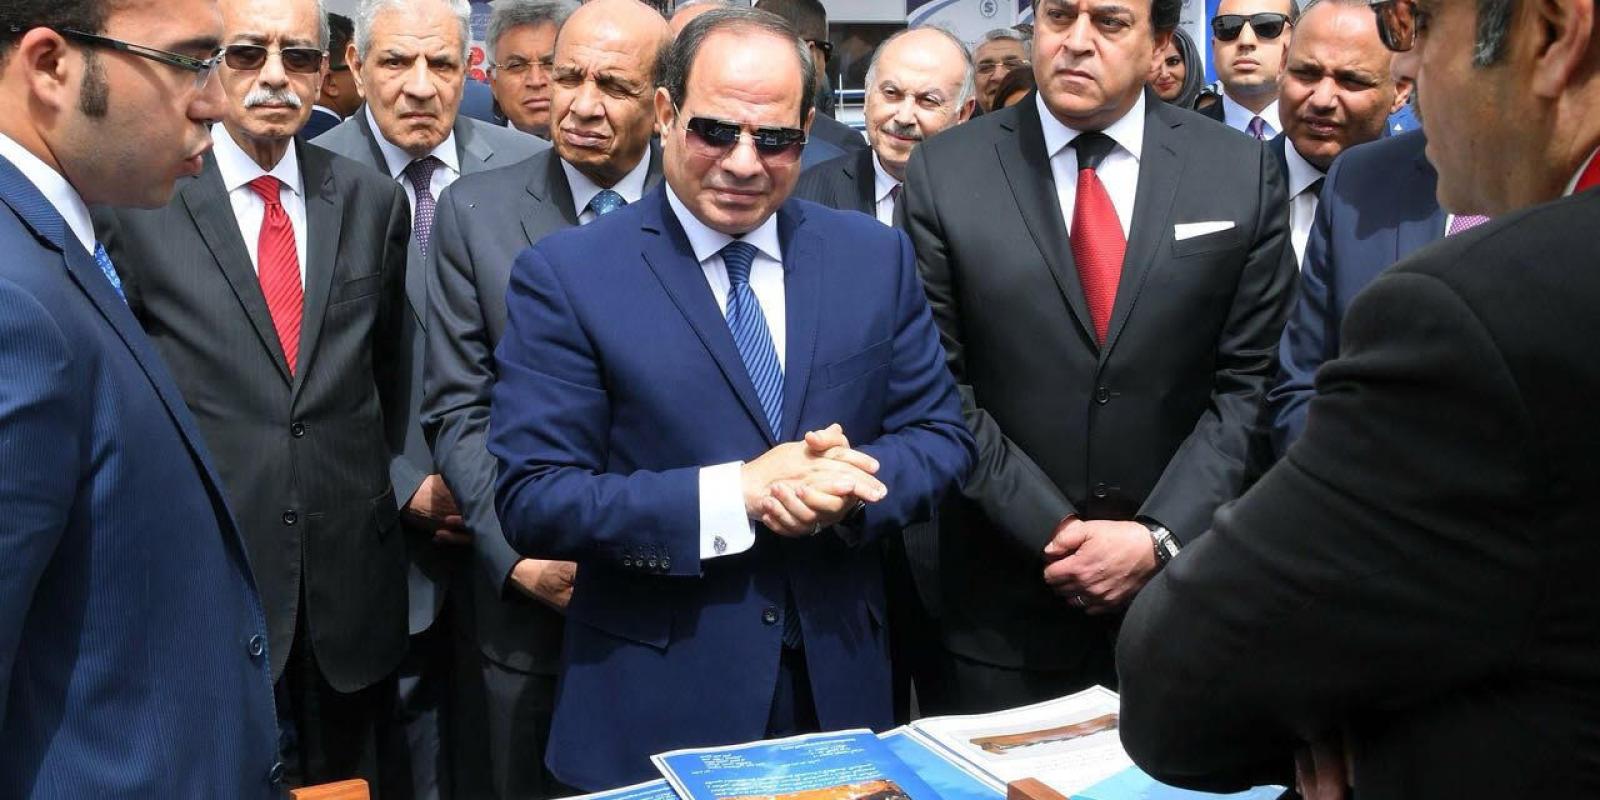 Alaa-Eldin Adris and Mohamed Abdelmoez presenting AUC's projects to Egyptian President Abdel Fattah El Sisi and other high-ranking government officials, photo courtesy of Egyptian presidency spokesperson